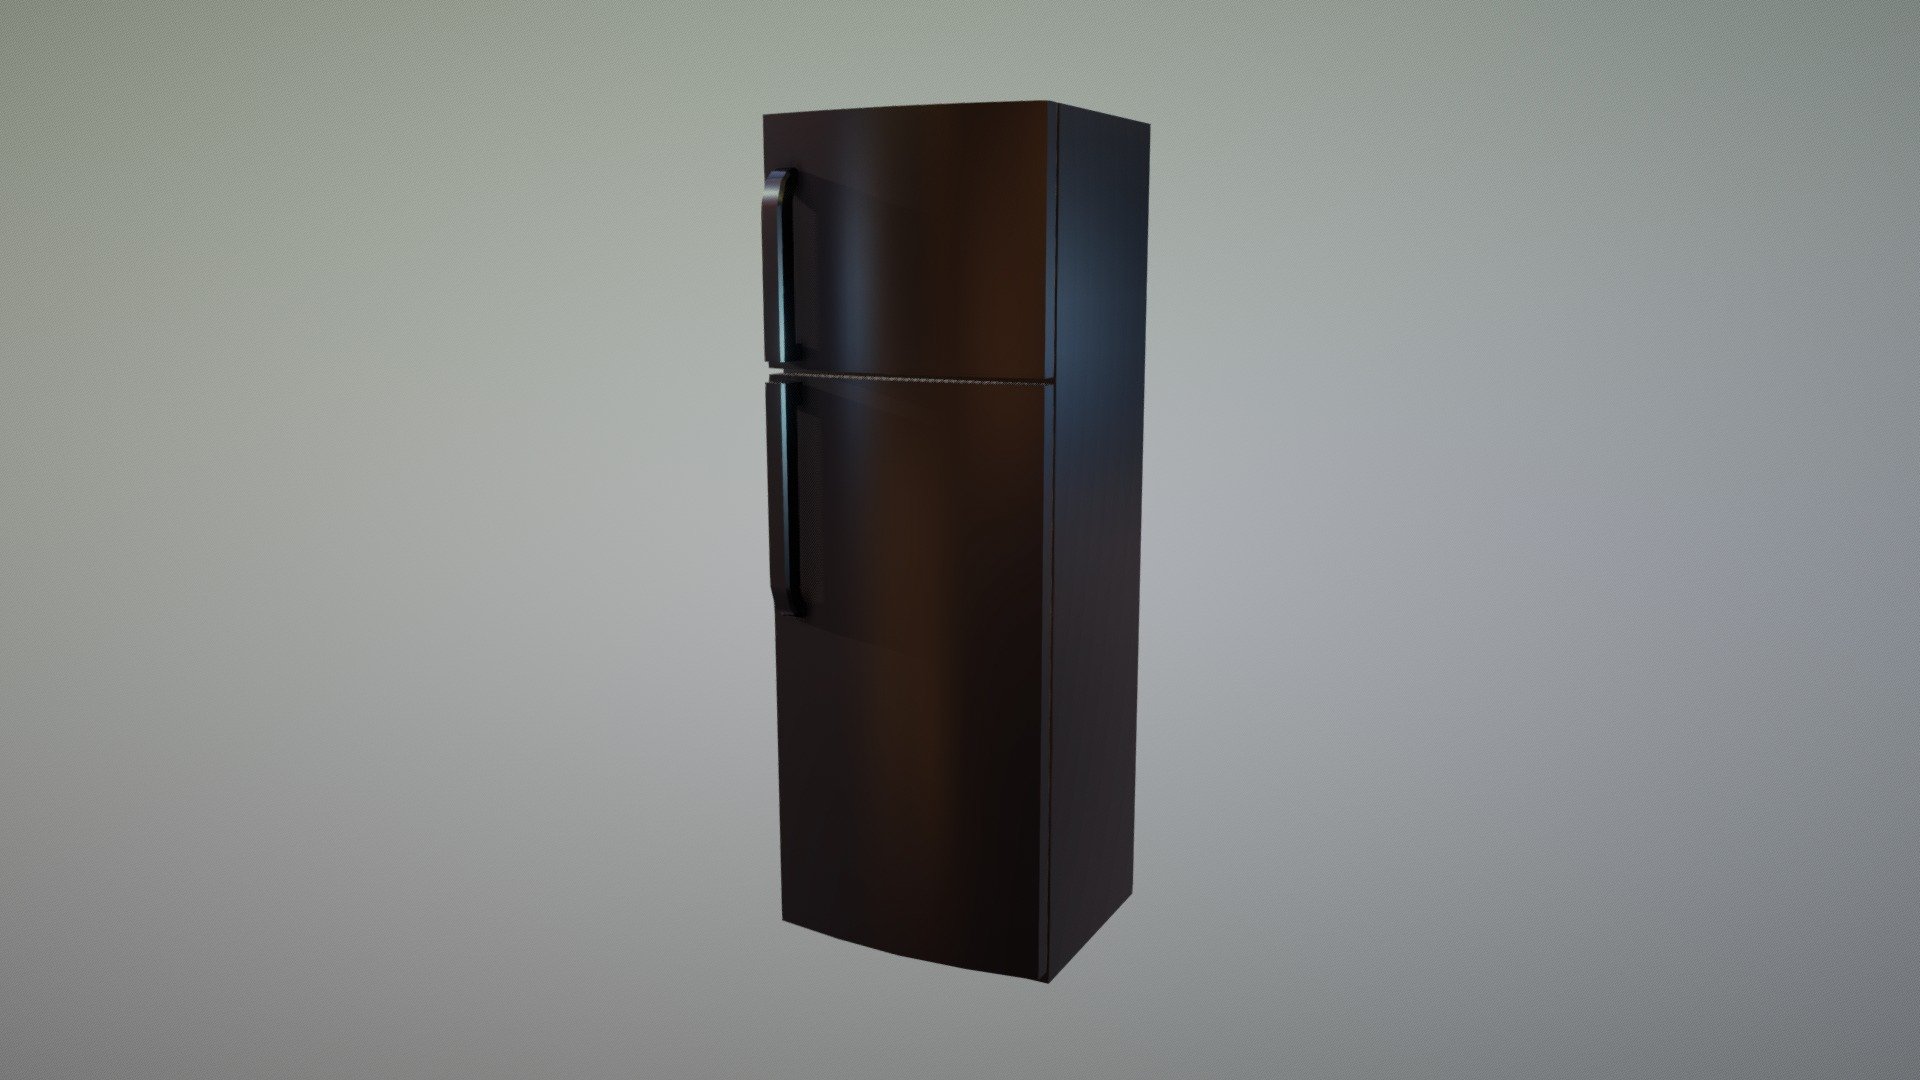 Day 23 of the household props challenge, a simple refrigerator.

Constraints:


300 Tris 
Albedo and AO maps only
256x256 texture resolution
 - Refrigerator - Household Props Challenge, Day 23 - Download Free 3D model by Pixel-bit 3d model